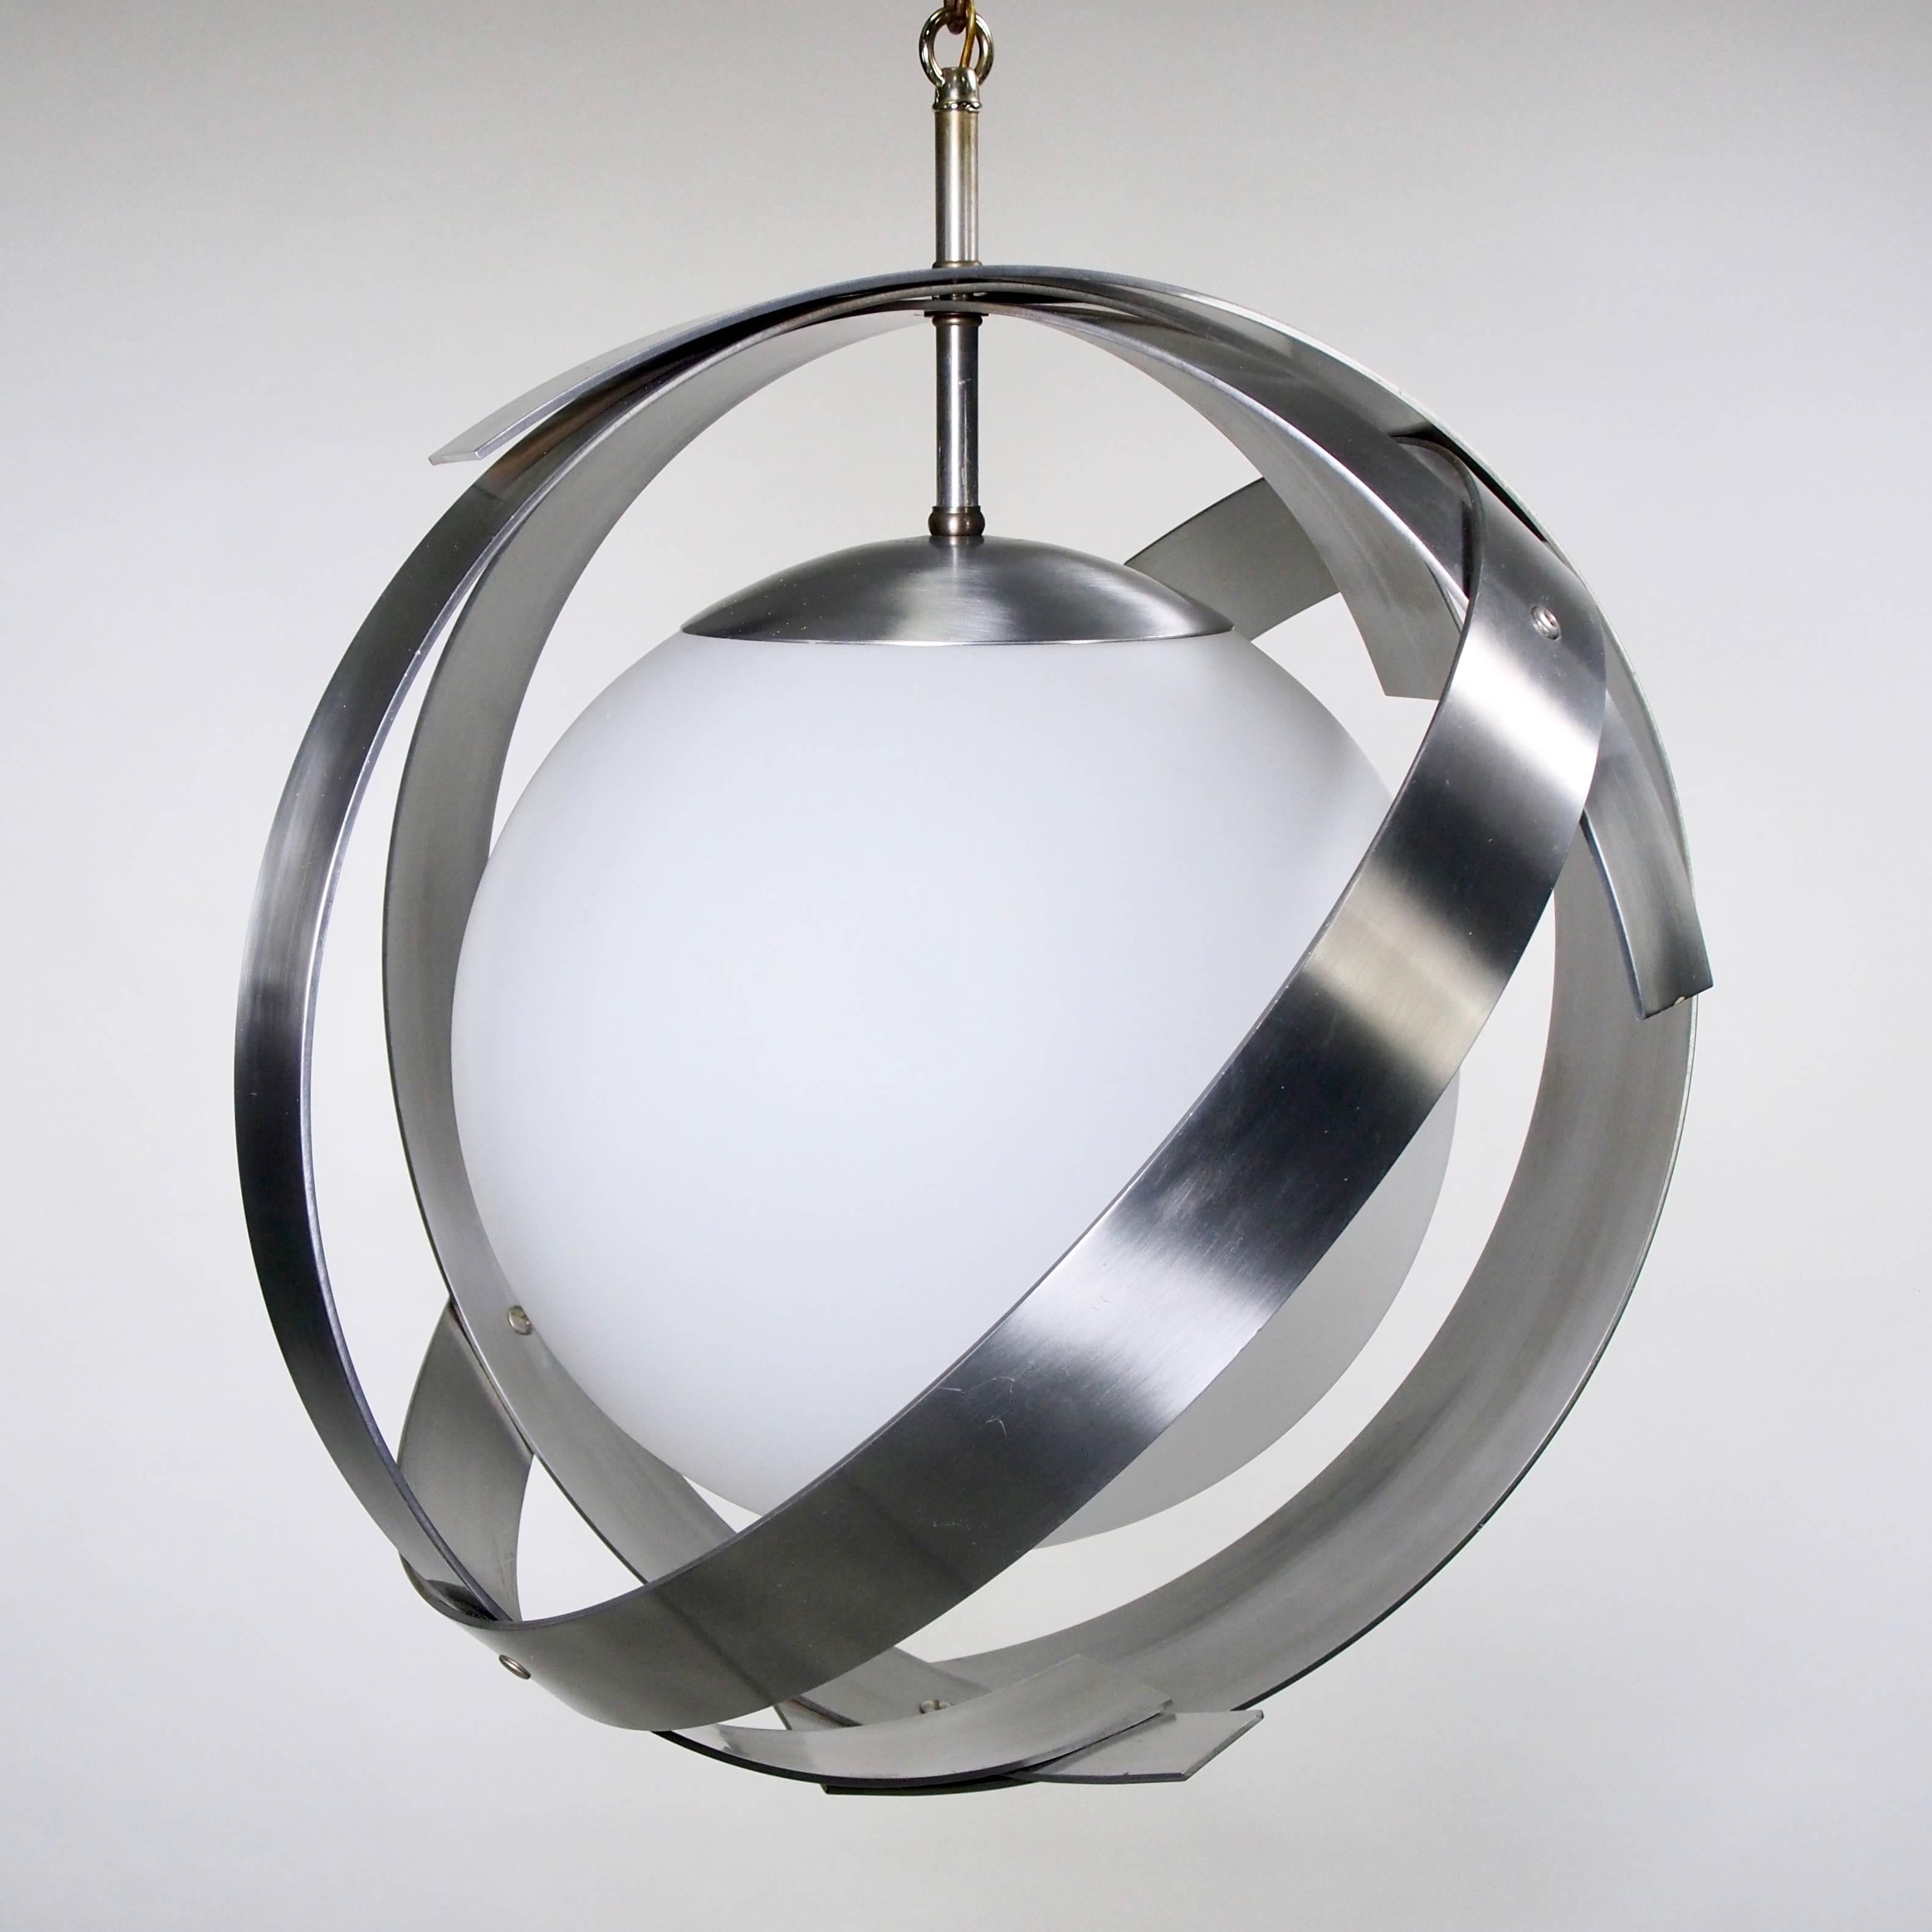 Laurel C-1126 pendant light fixtures from the 1974 Laurel catalog feature brushed aluminum open work surrounds with large white glass globes. Excellent vintage condition. Sold and priced as a pair. 